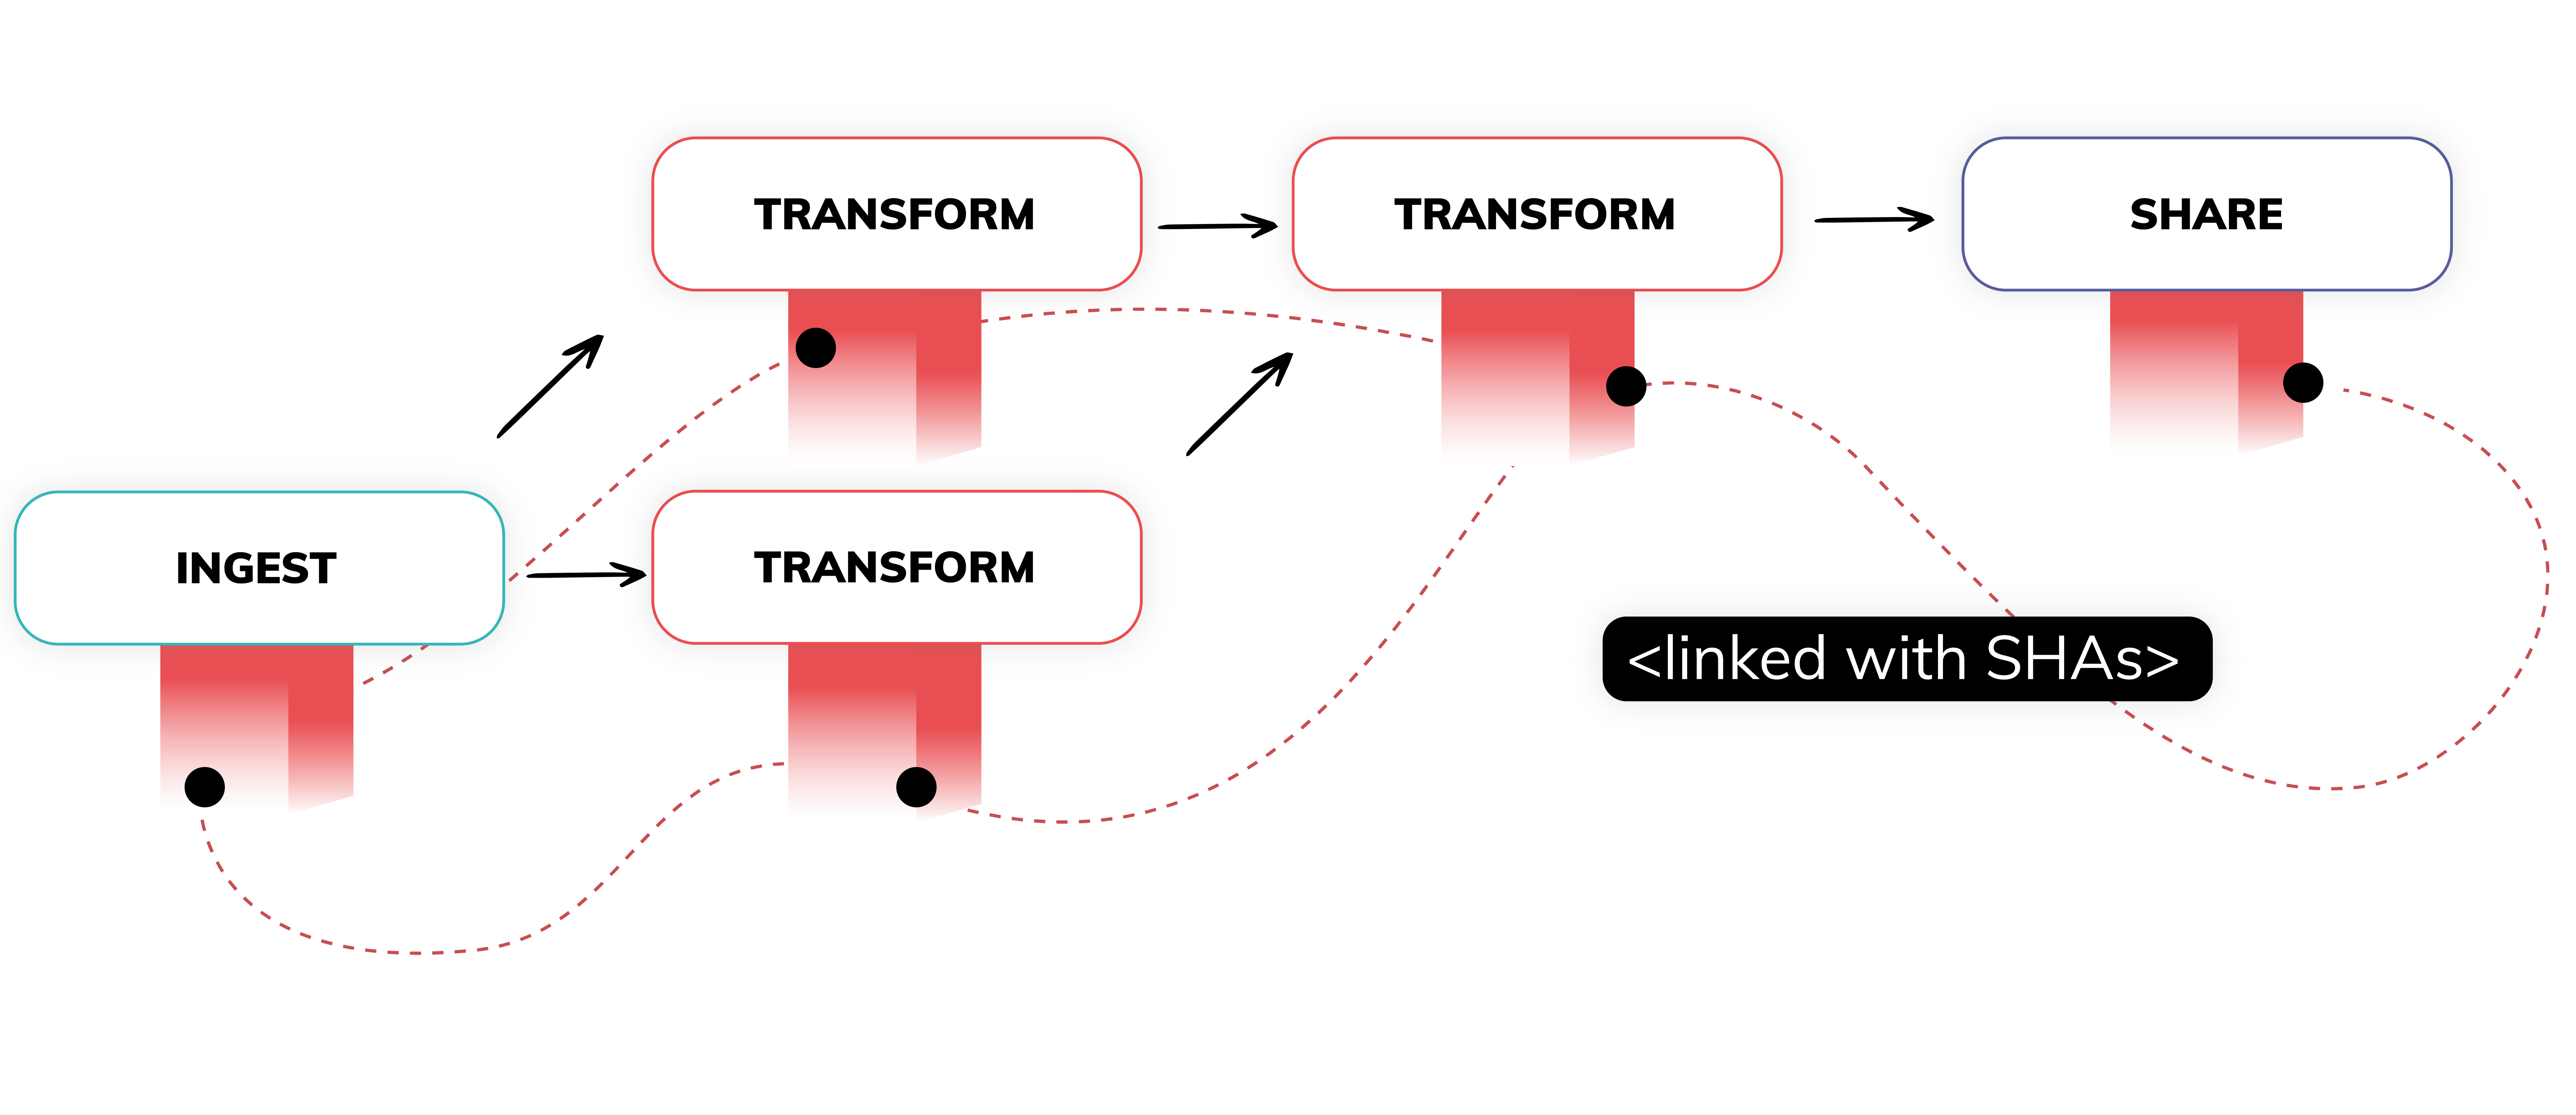 Visual representation of the fingerprinting framework that allows automated change management in Ascend.